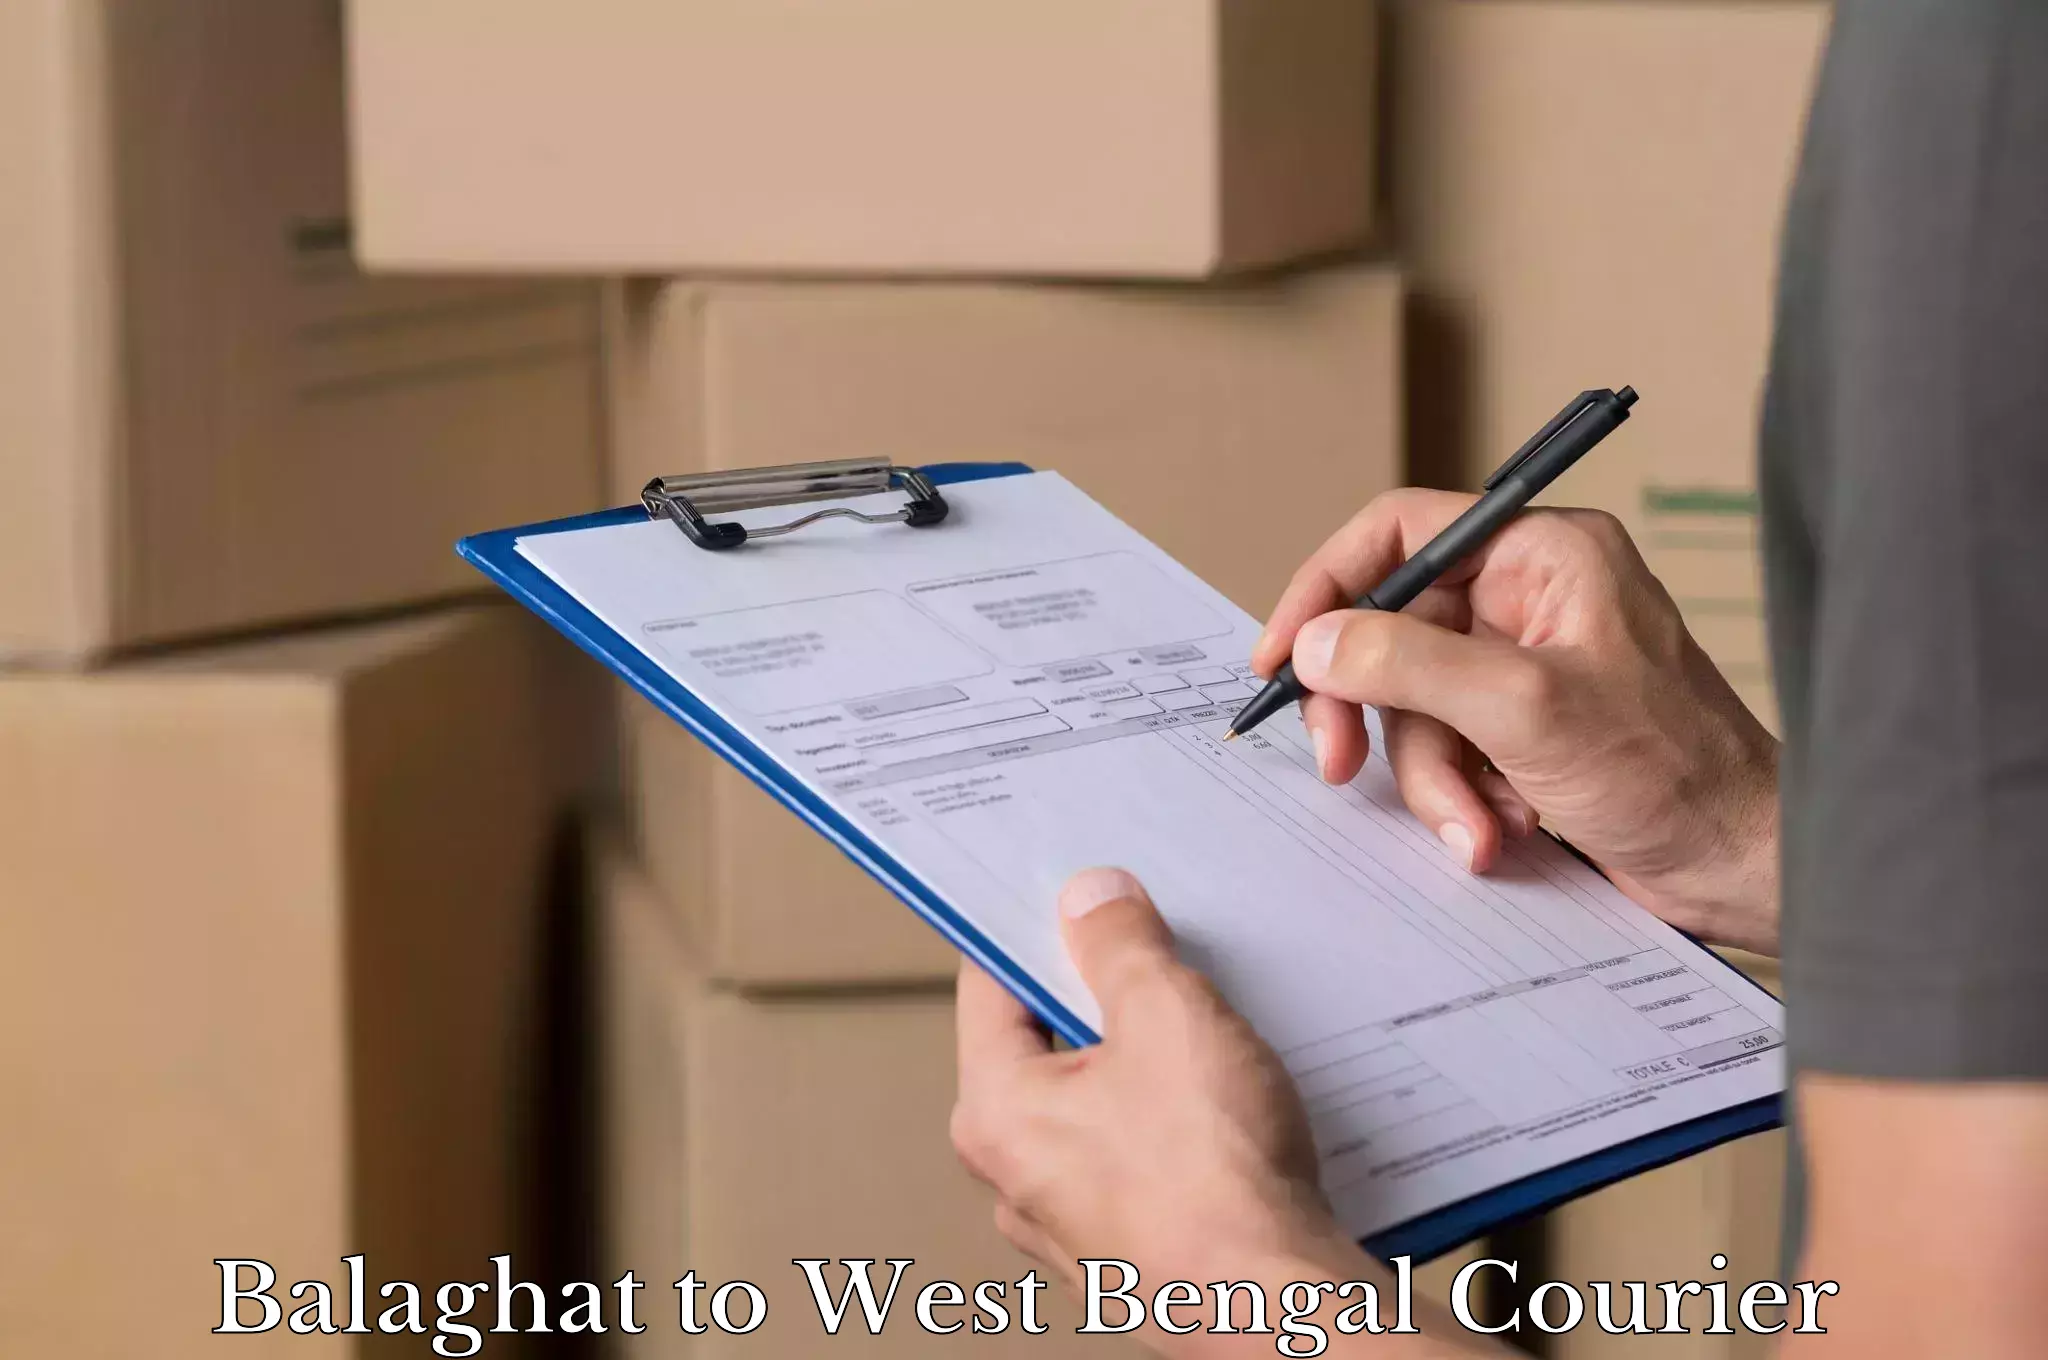 Instant baggage transport quote Balaghat to West Bengal